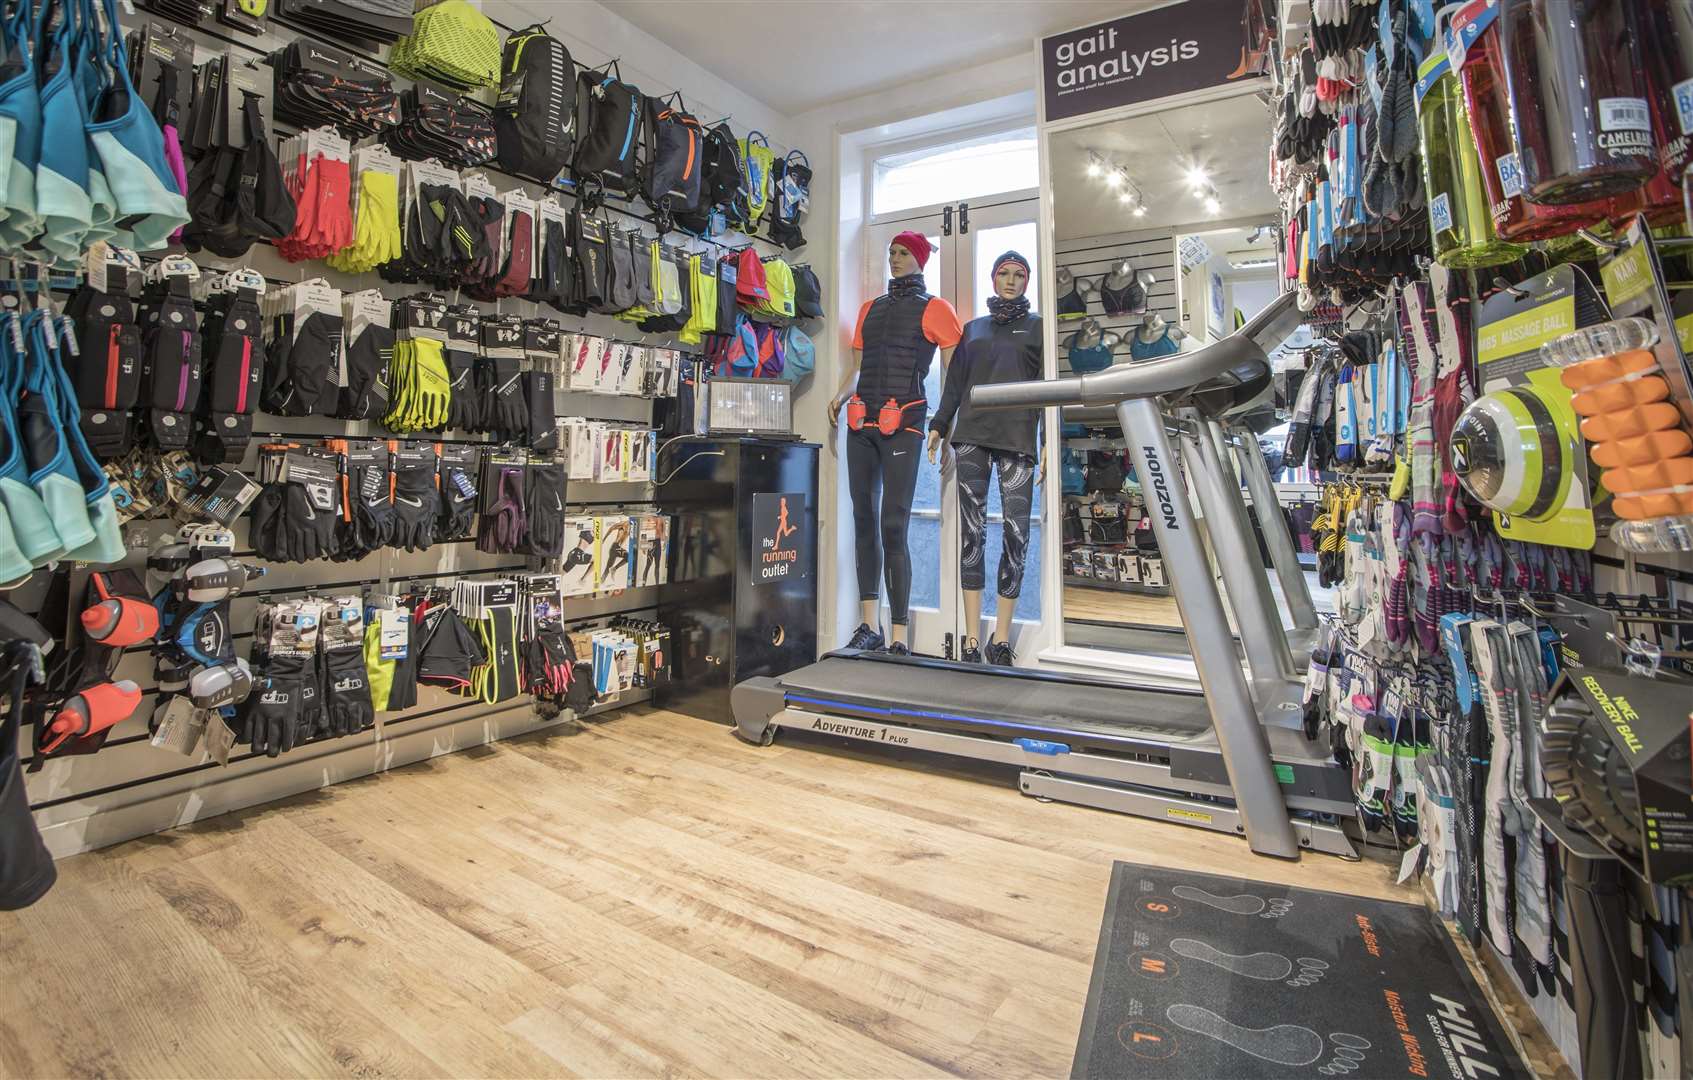 Gait analysis is available at The Running Outlet in Canterbury.